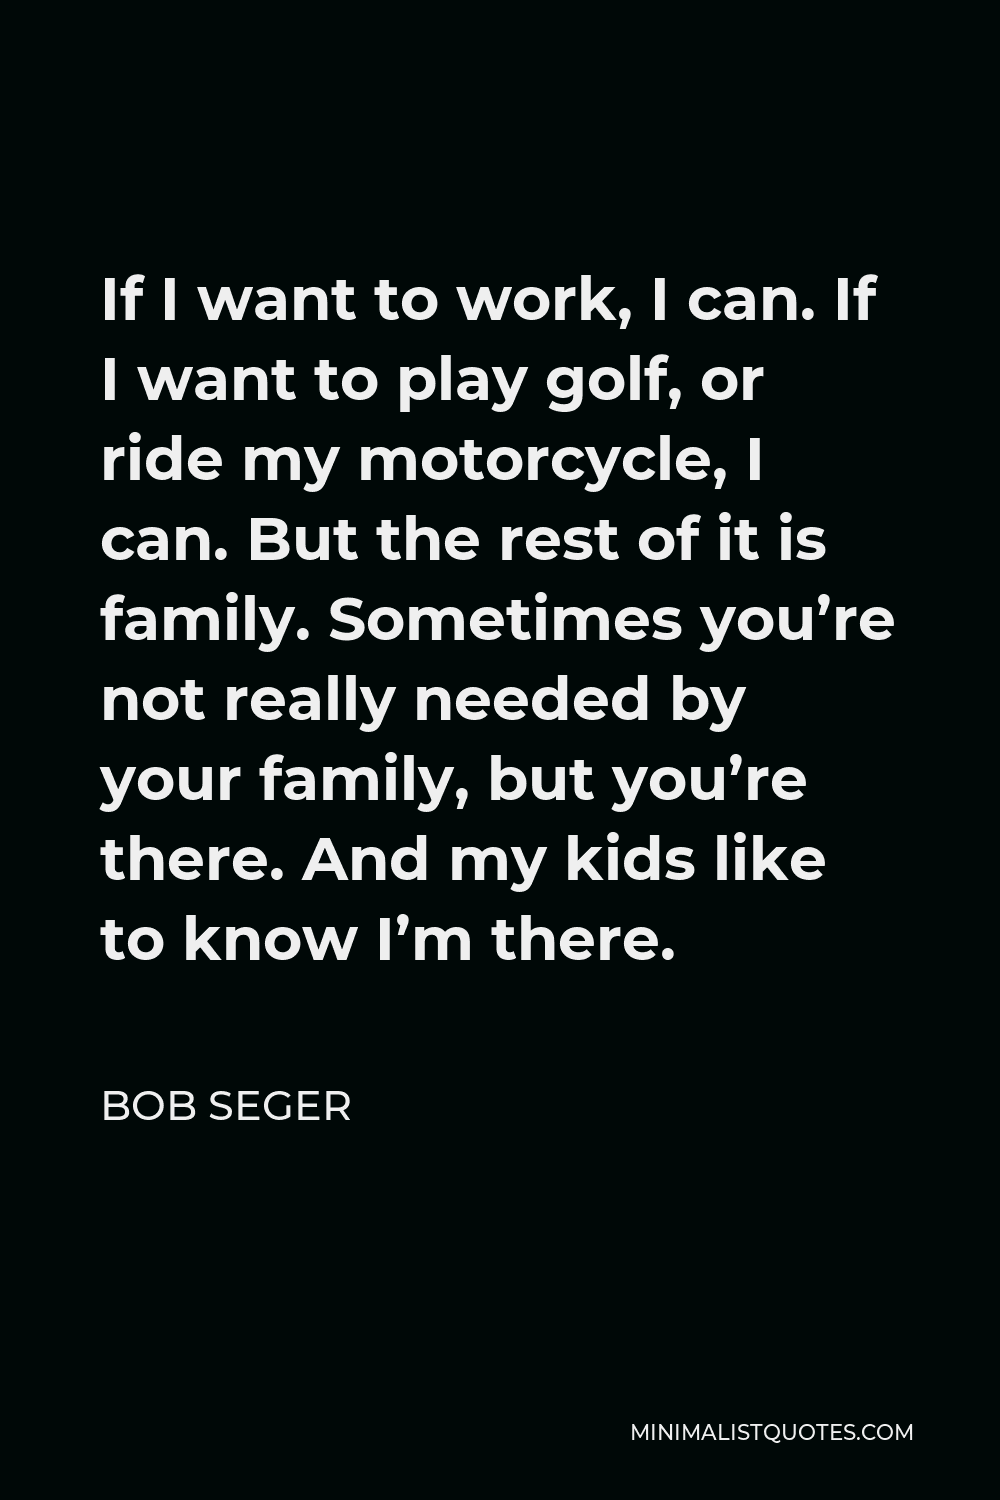 Bob Seger Quote - If I want to work, I can. If I want to play golf, or ride my motorcycle, I can. But the rest of it is family. Sometimes you’re not really needed by your family, but you’re there. And my kids like to know I’m there.